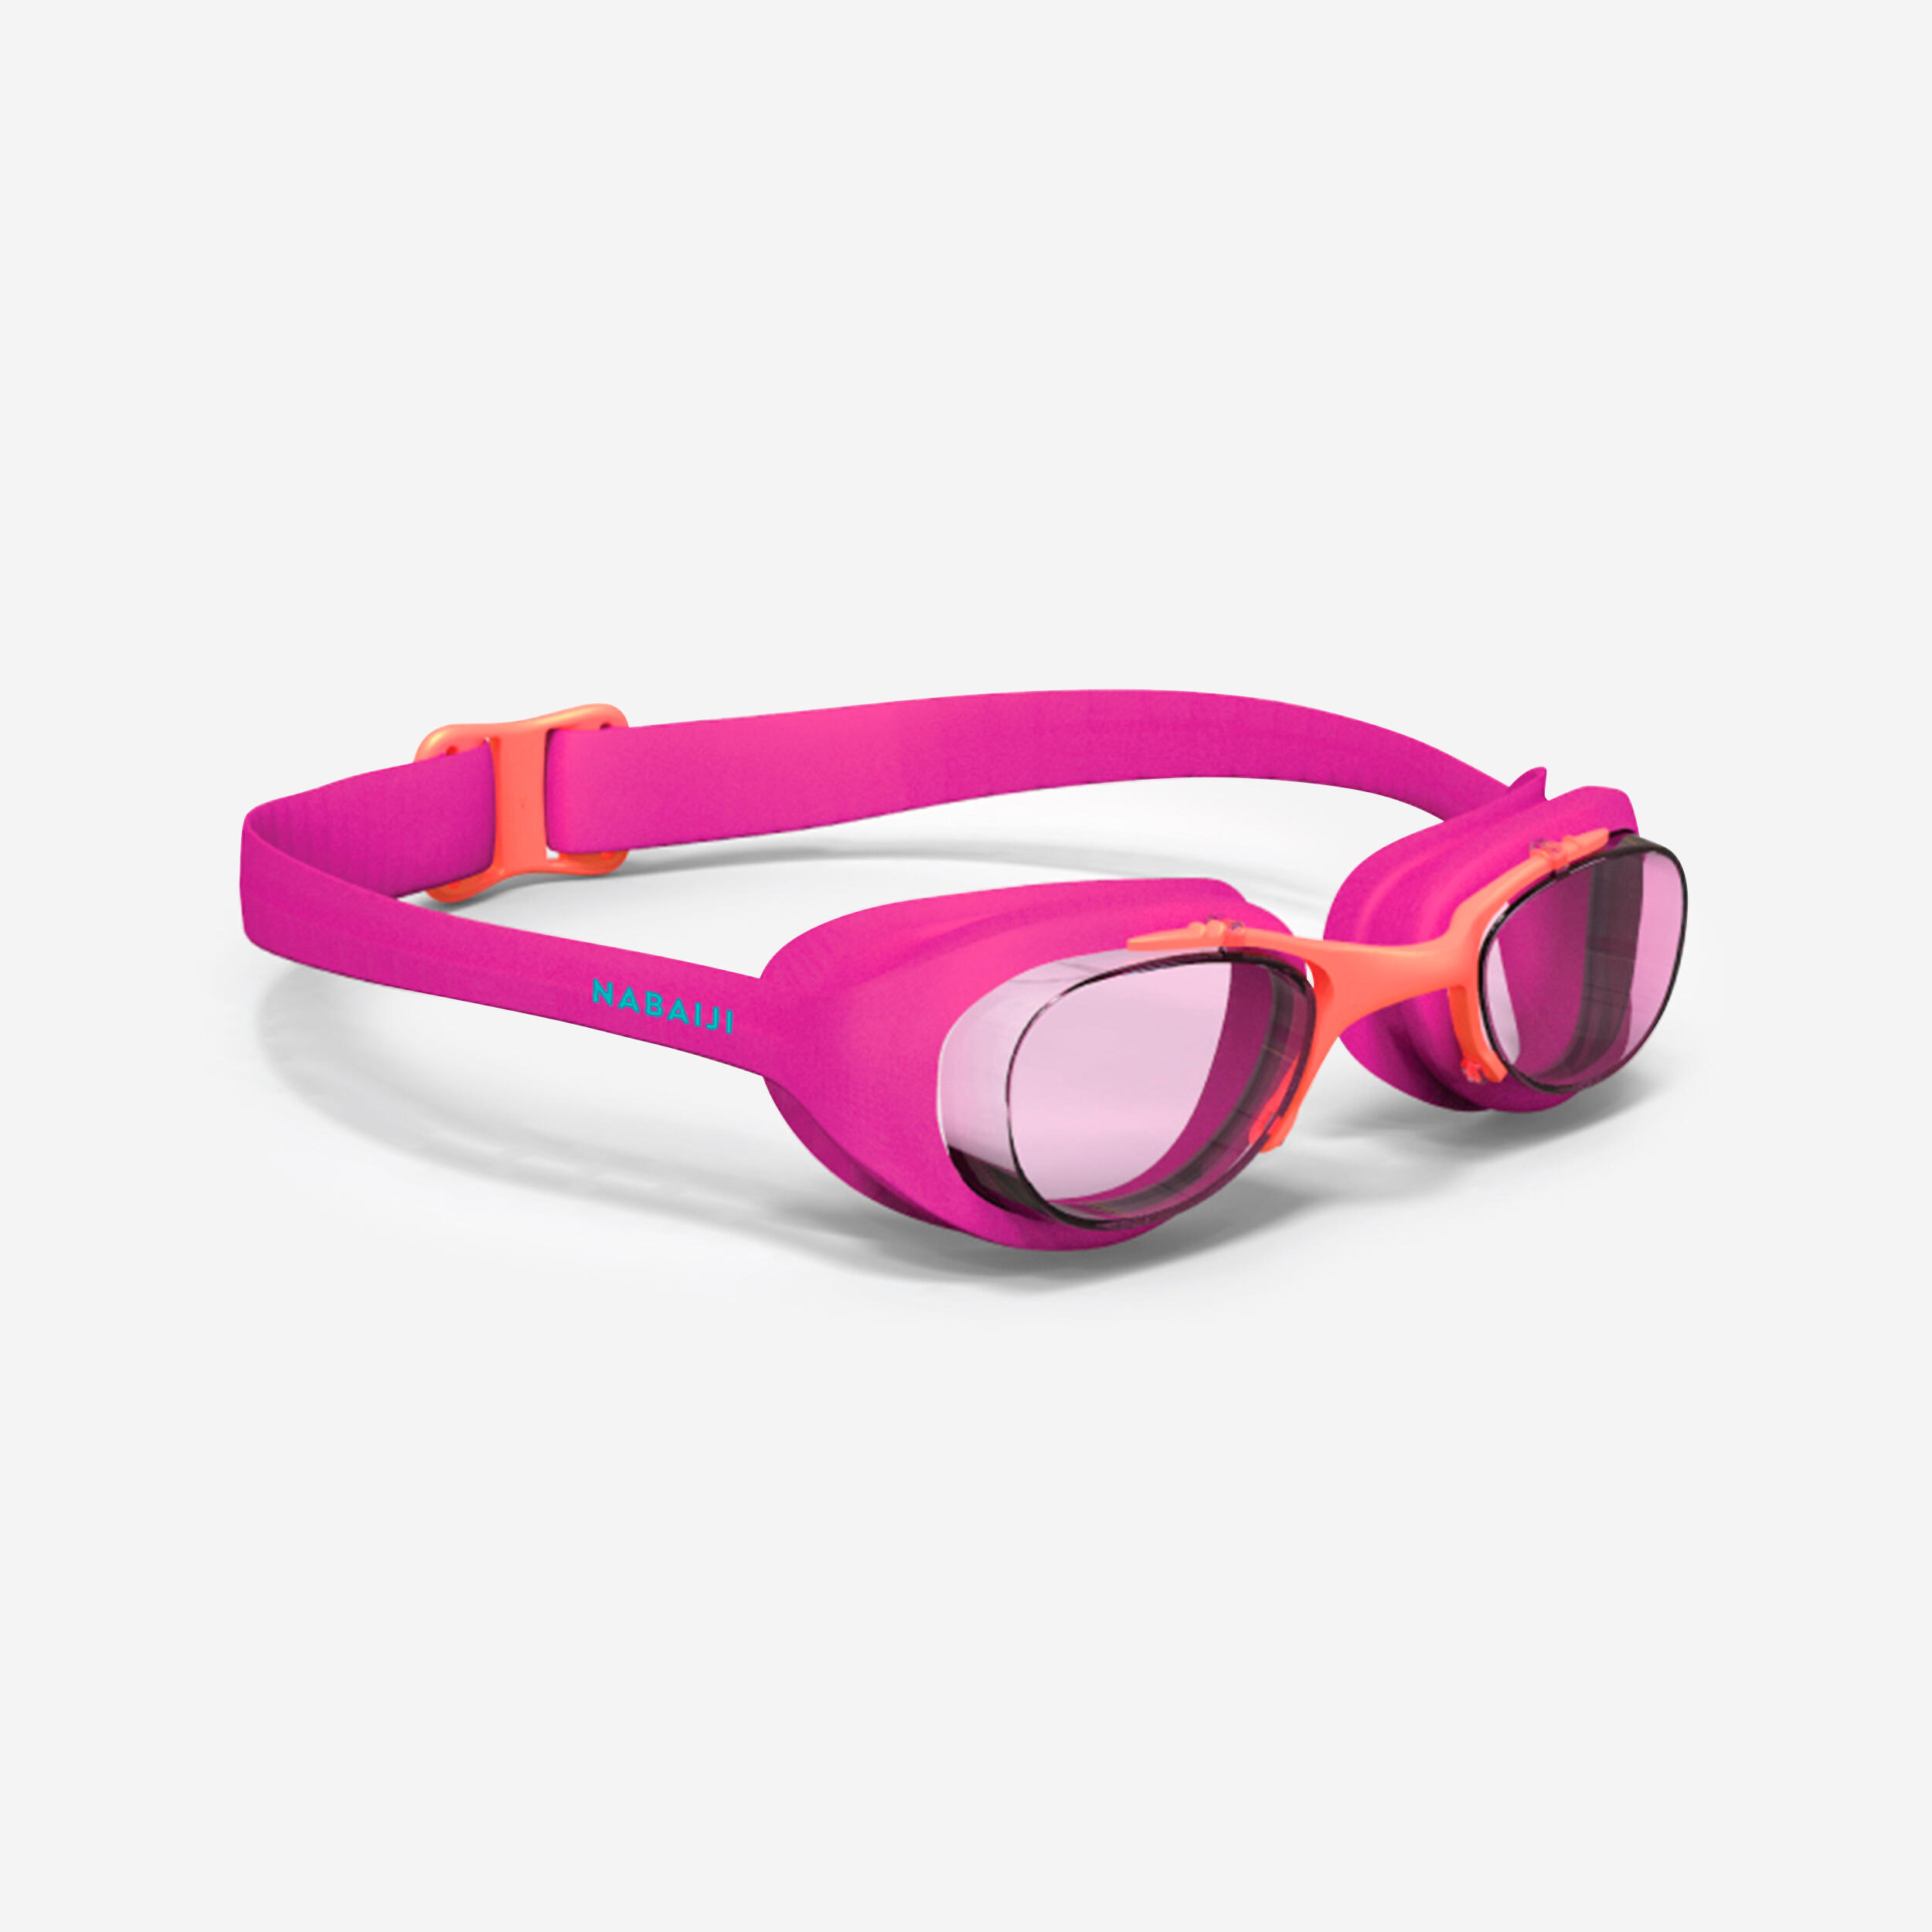 Swimming goggles XBASE - Clear lenses - Kids' size - Pink orange 1/5